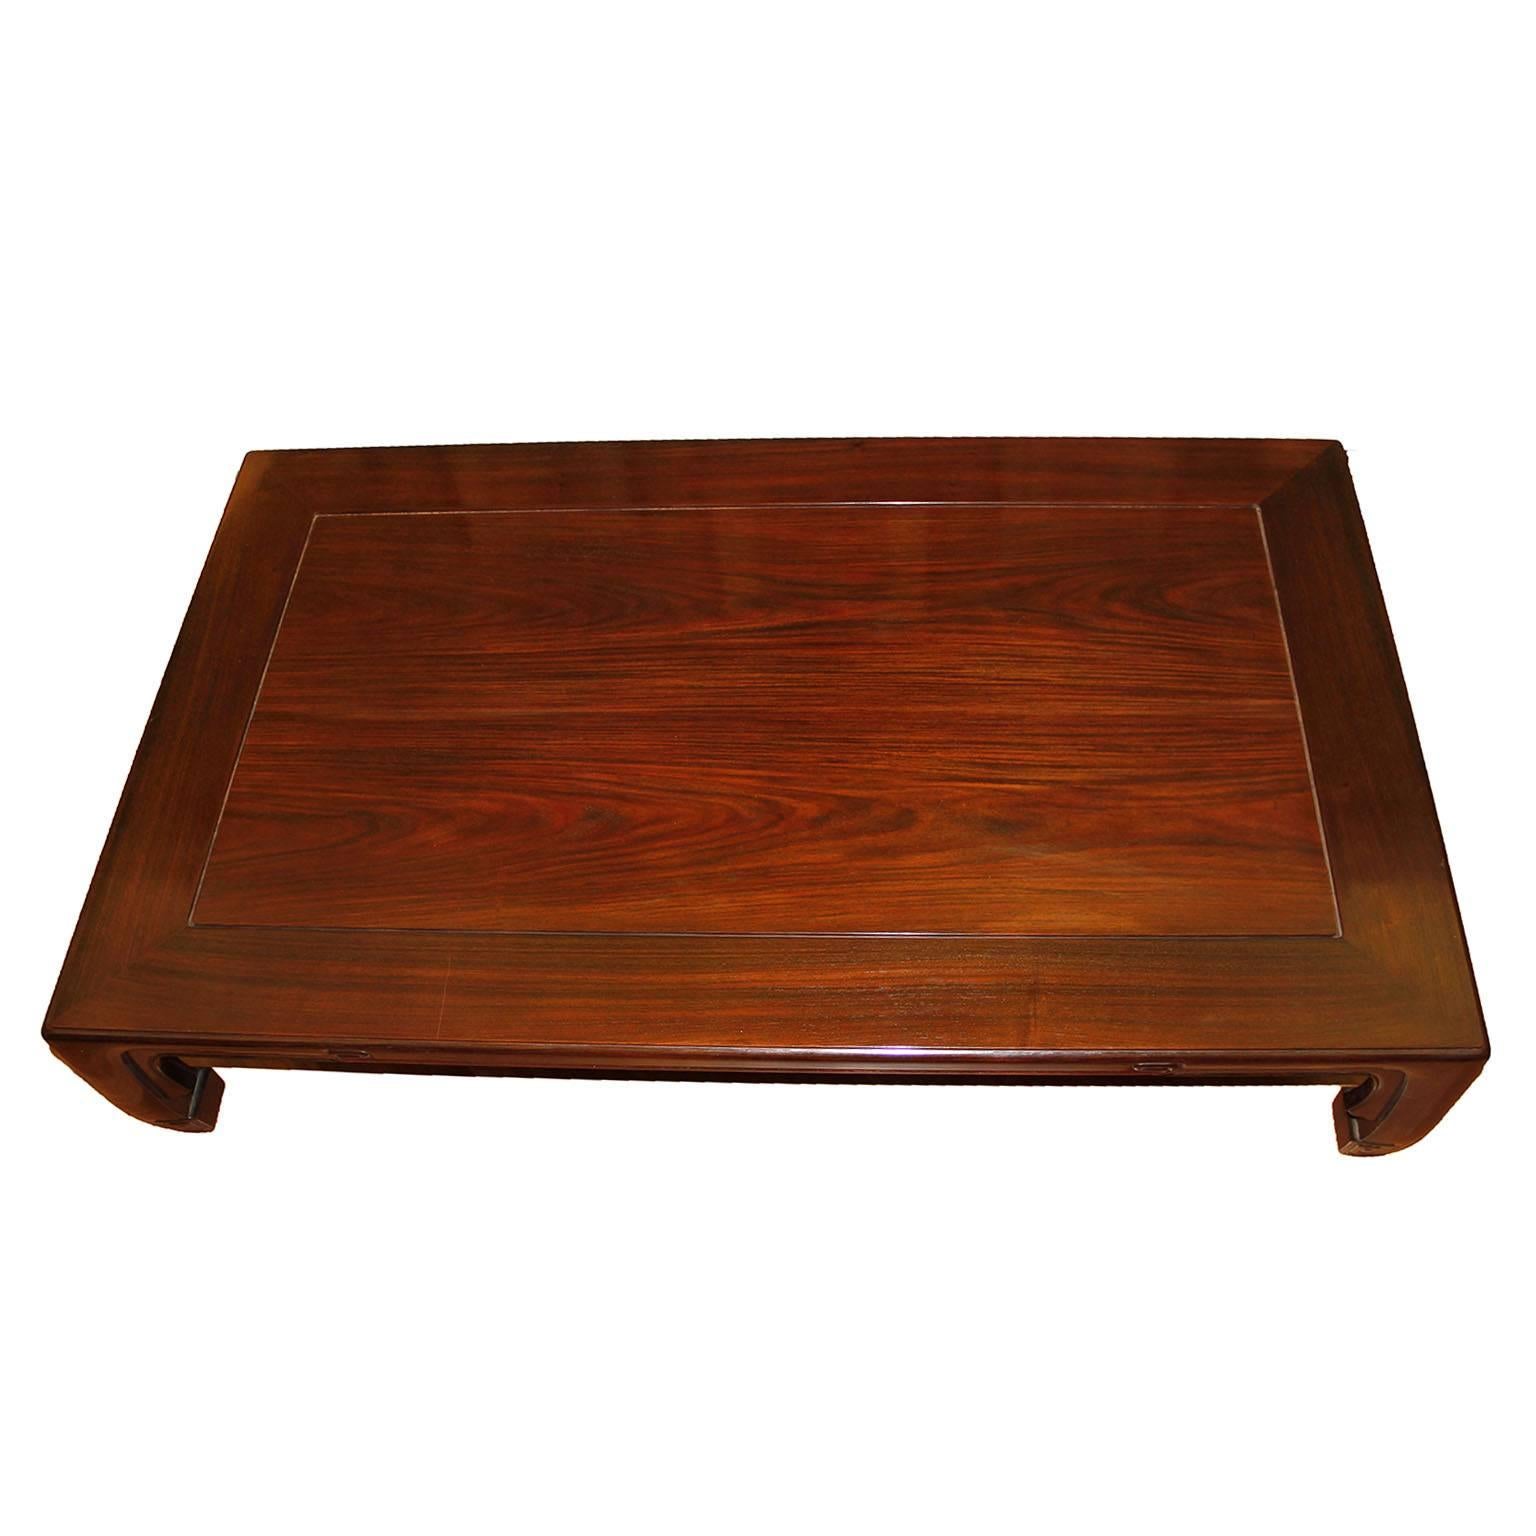 A dramatic Japanese low rectangular coffee table raised on black lacquered square legs. 

Dimensions:
12.99 in H x 60.23 in W x 35.82 in D
33 cm H x 153 cm W x 91 cm D.